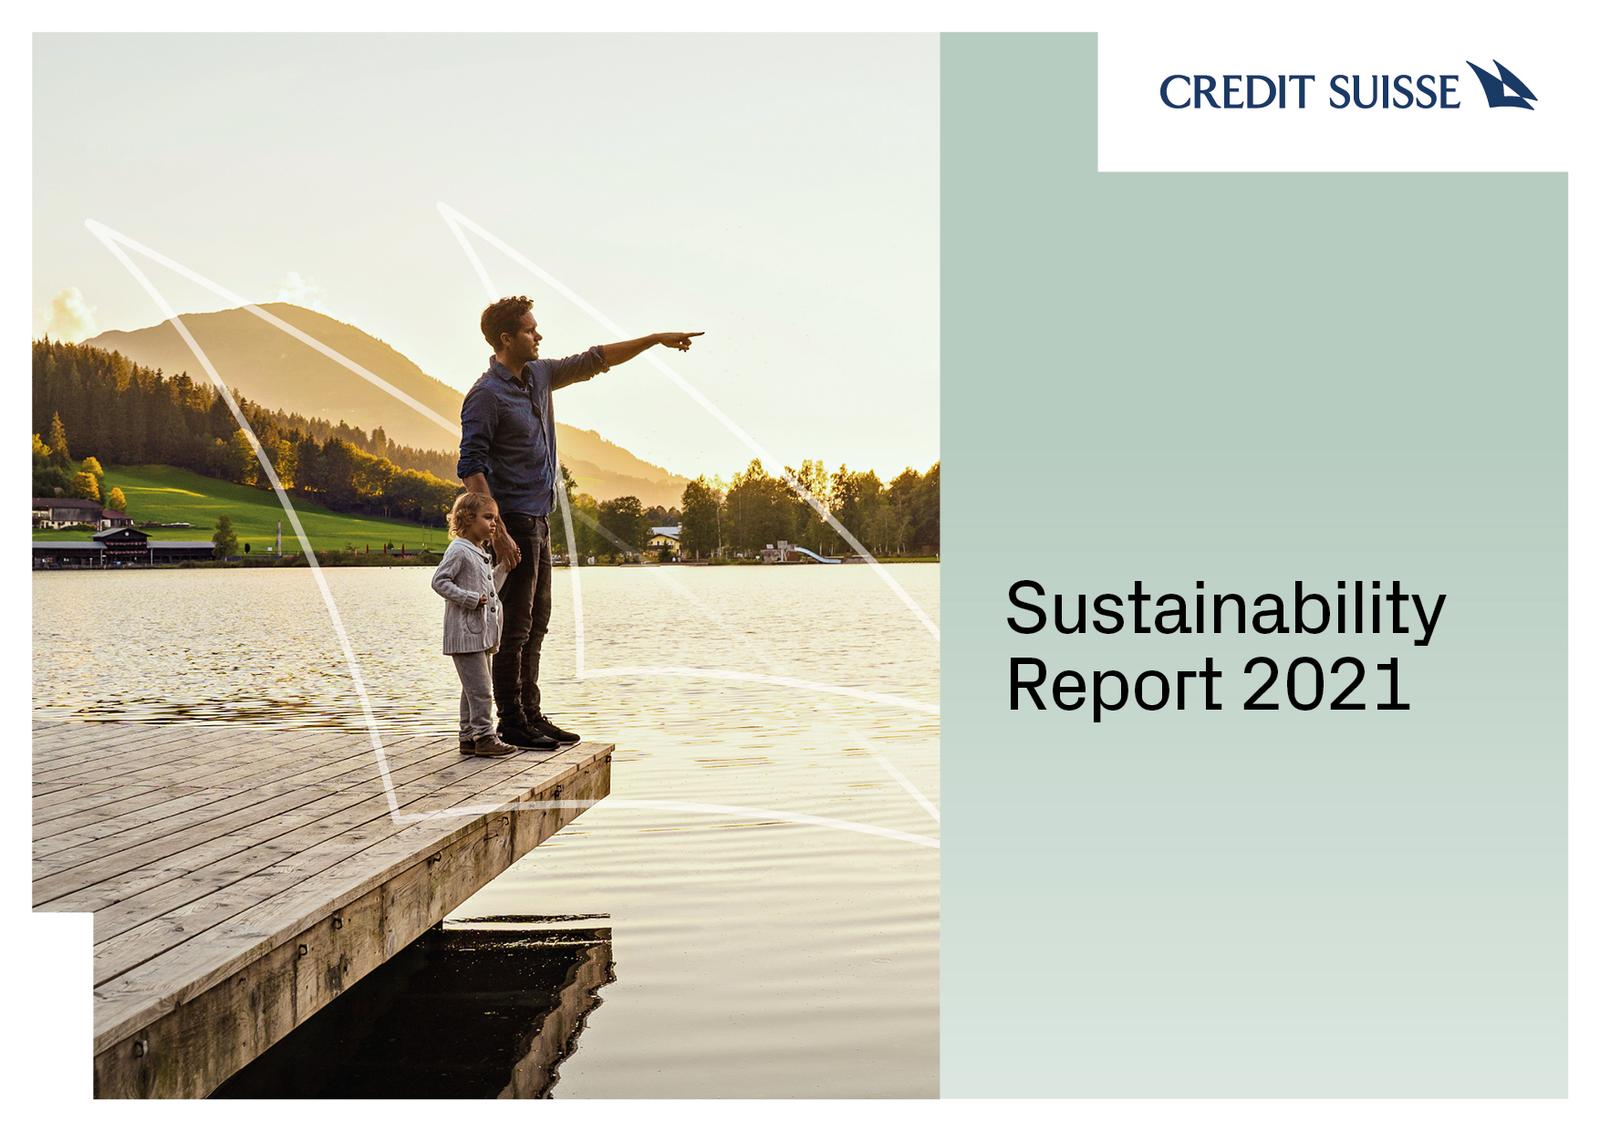 Credit Suisse has released its Annual Report and Sustainability Report for 2021